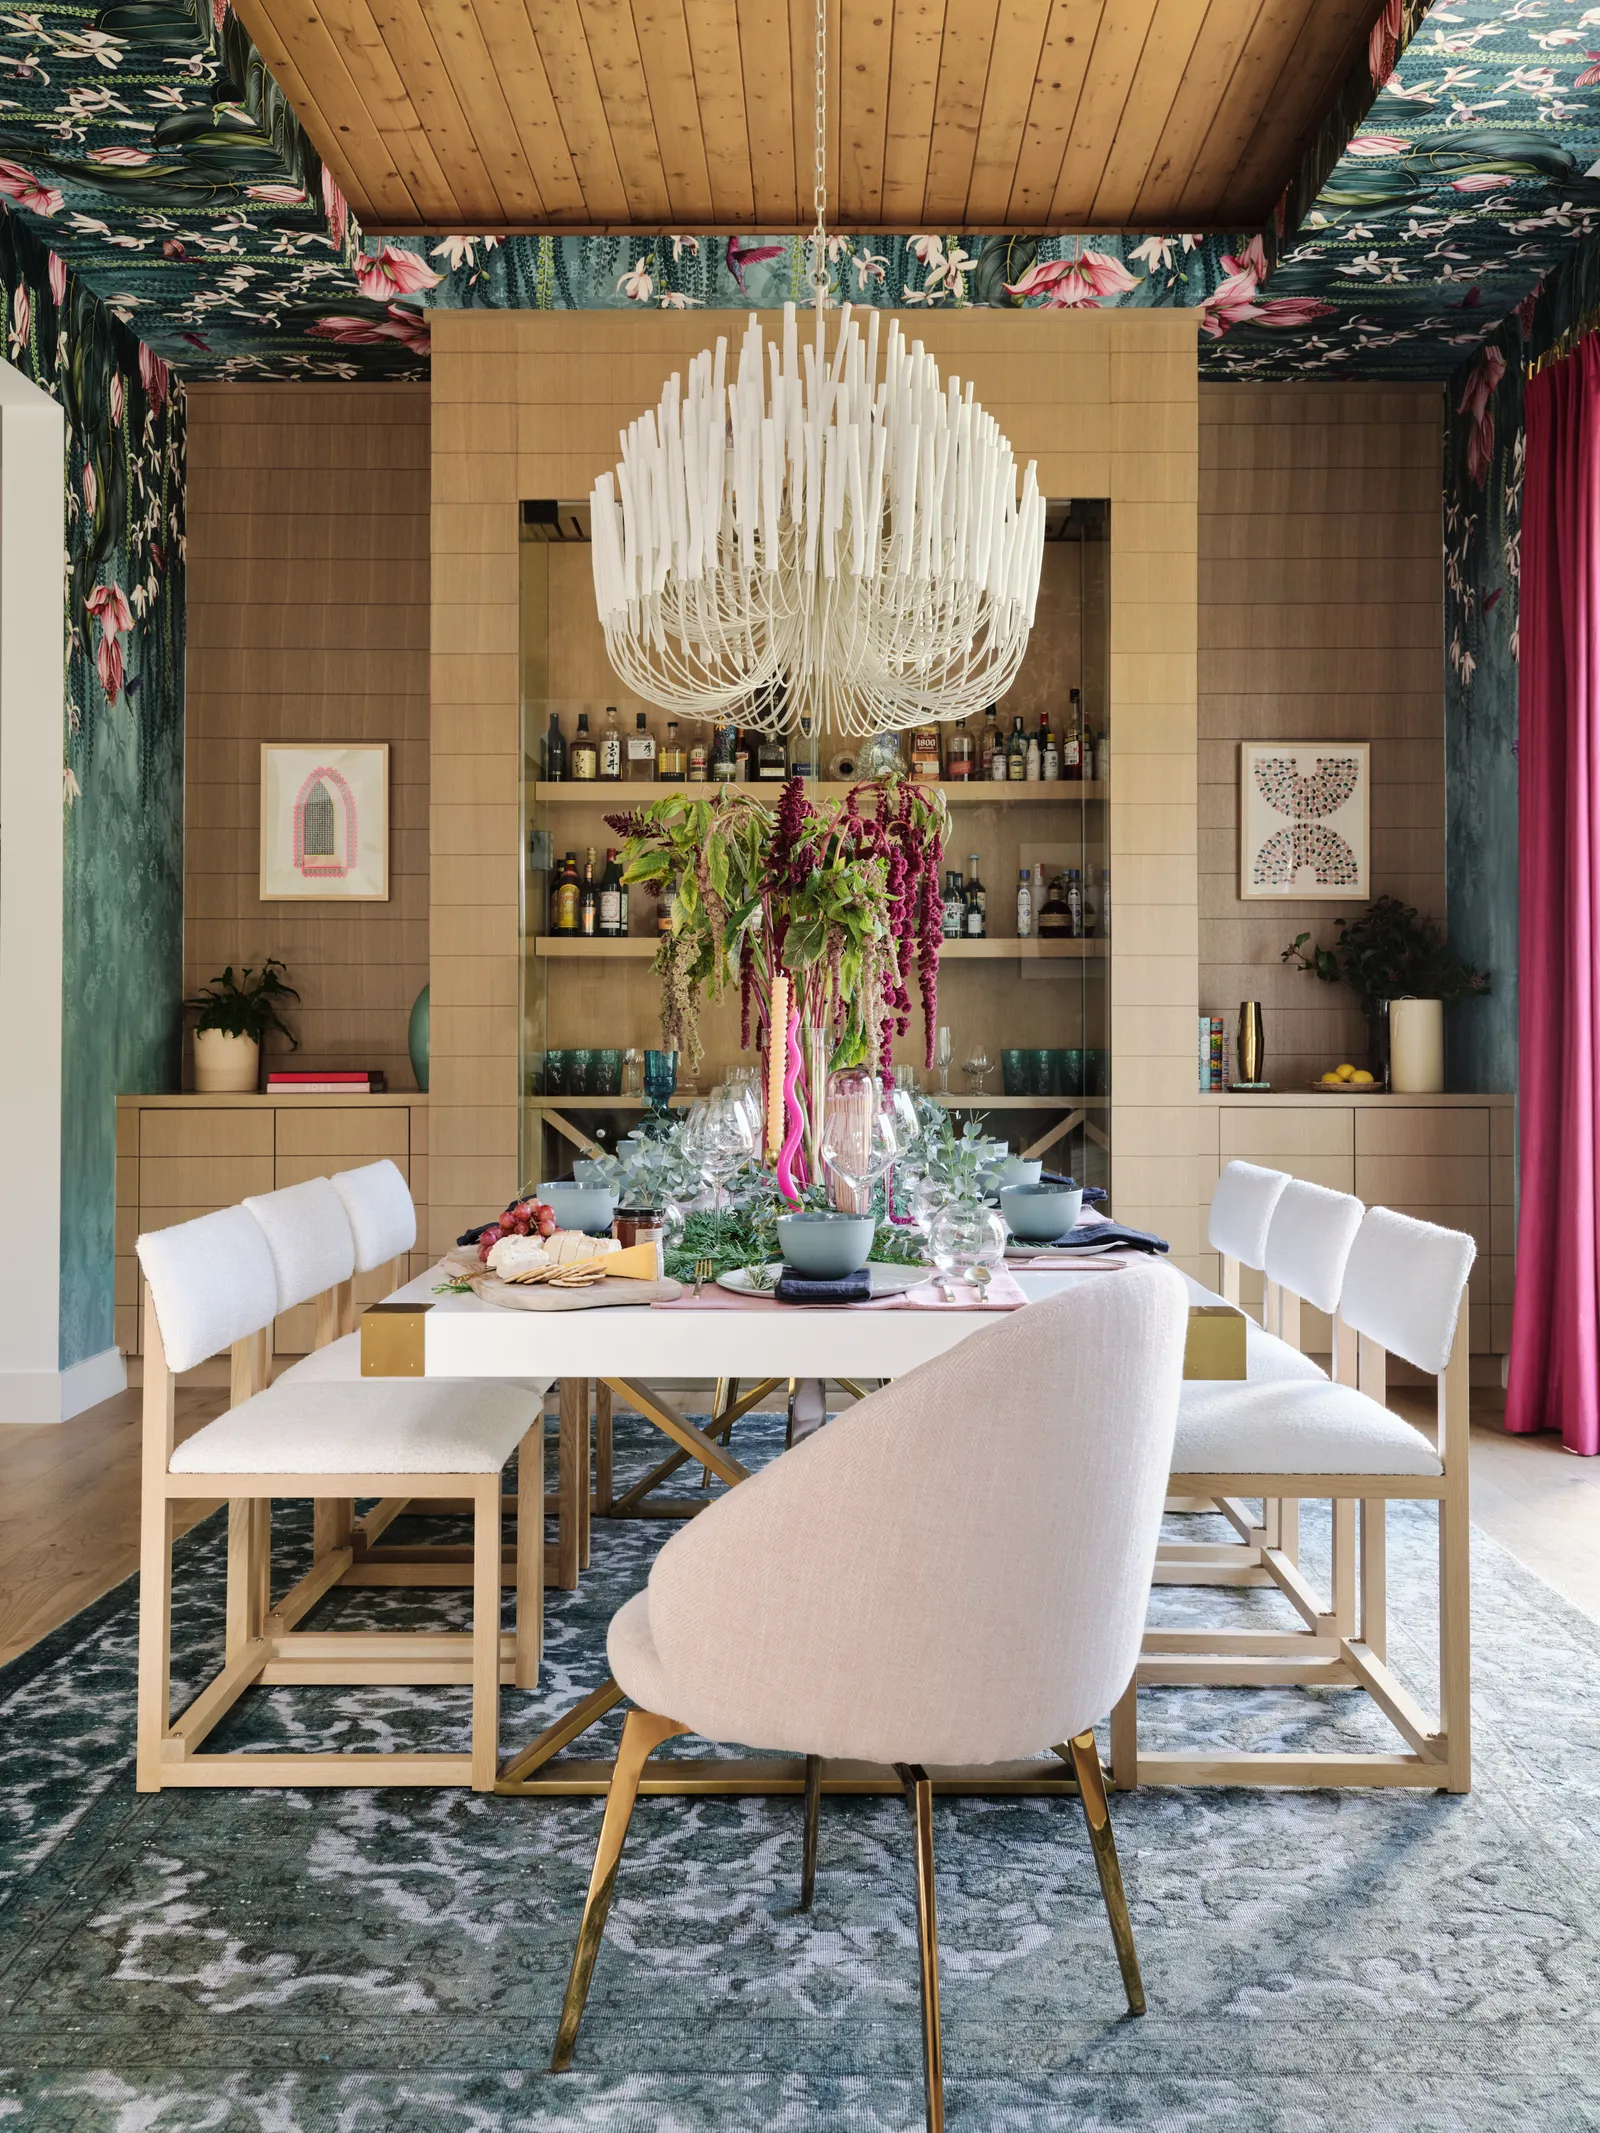 30+ Gorgeous Dining Room Decor Ideas to Inspire You